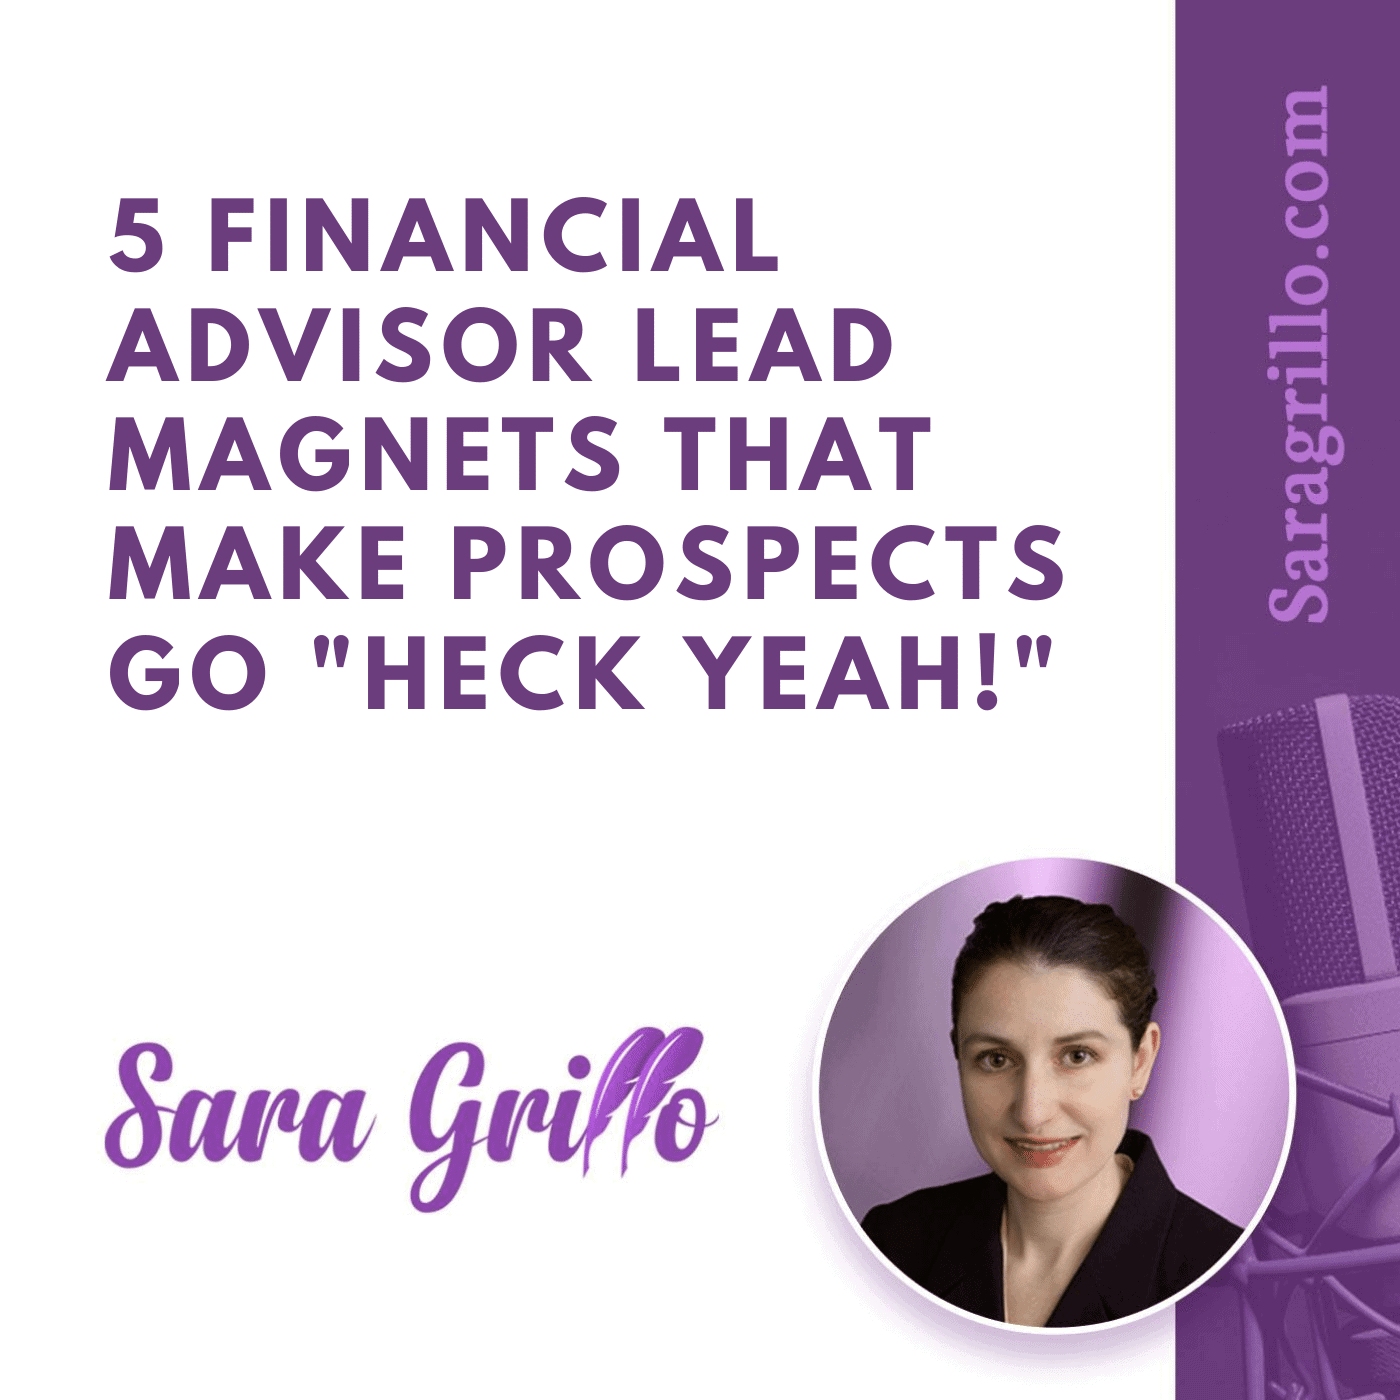 Here are 5 financial advisor lead magnets that are going to make prospects say HECK YEAH!